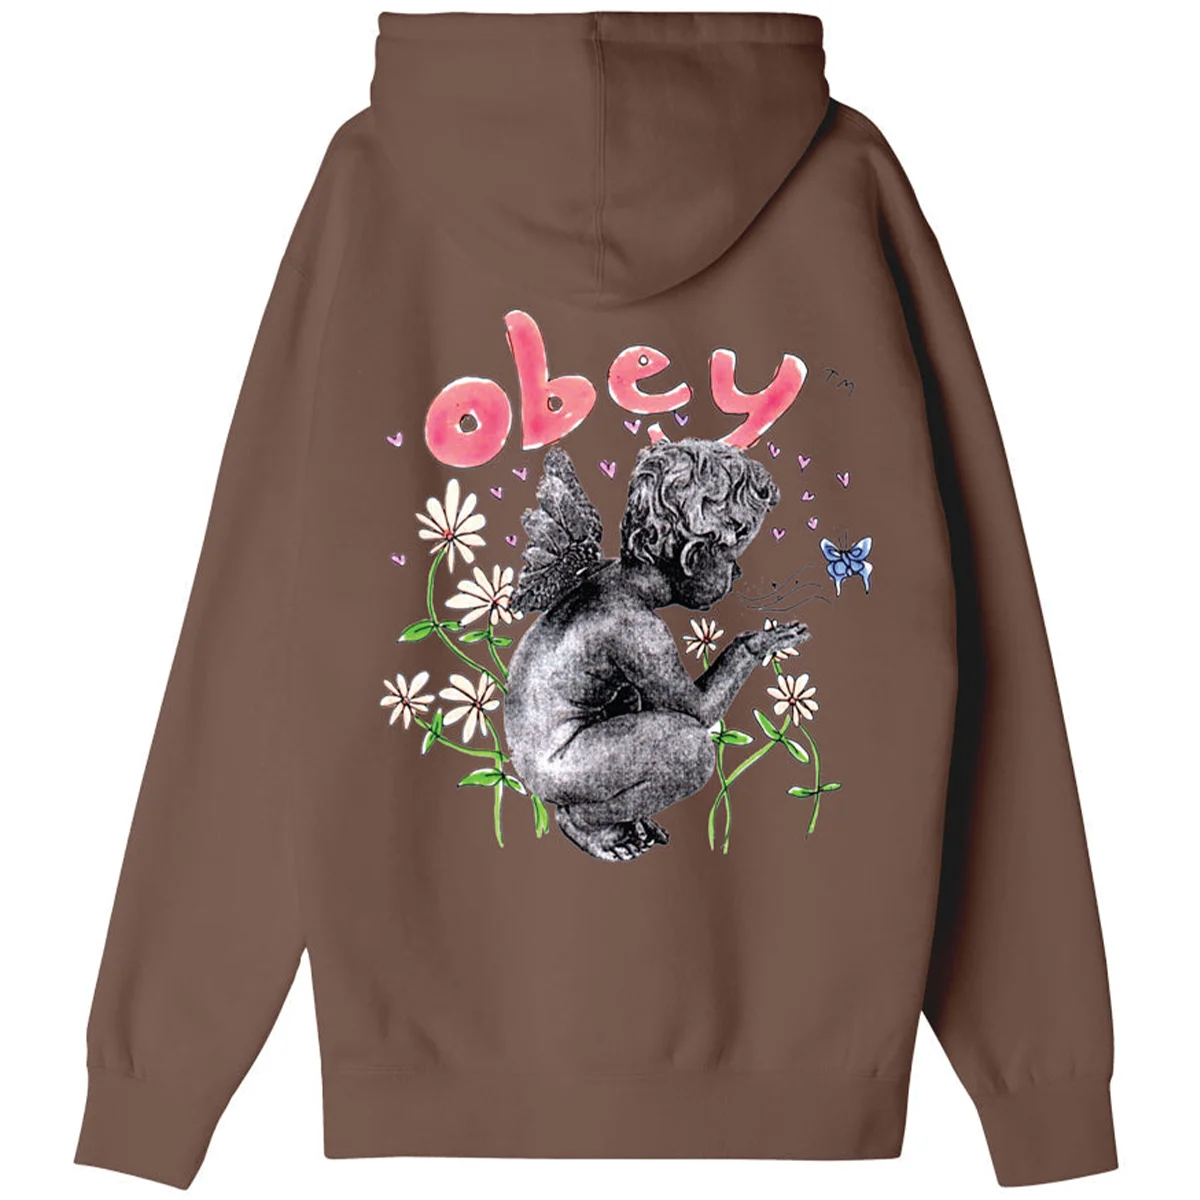 Obey Clothing A Comprehensive Guide Visual Identity